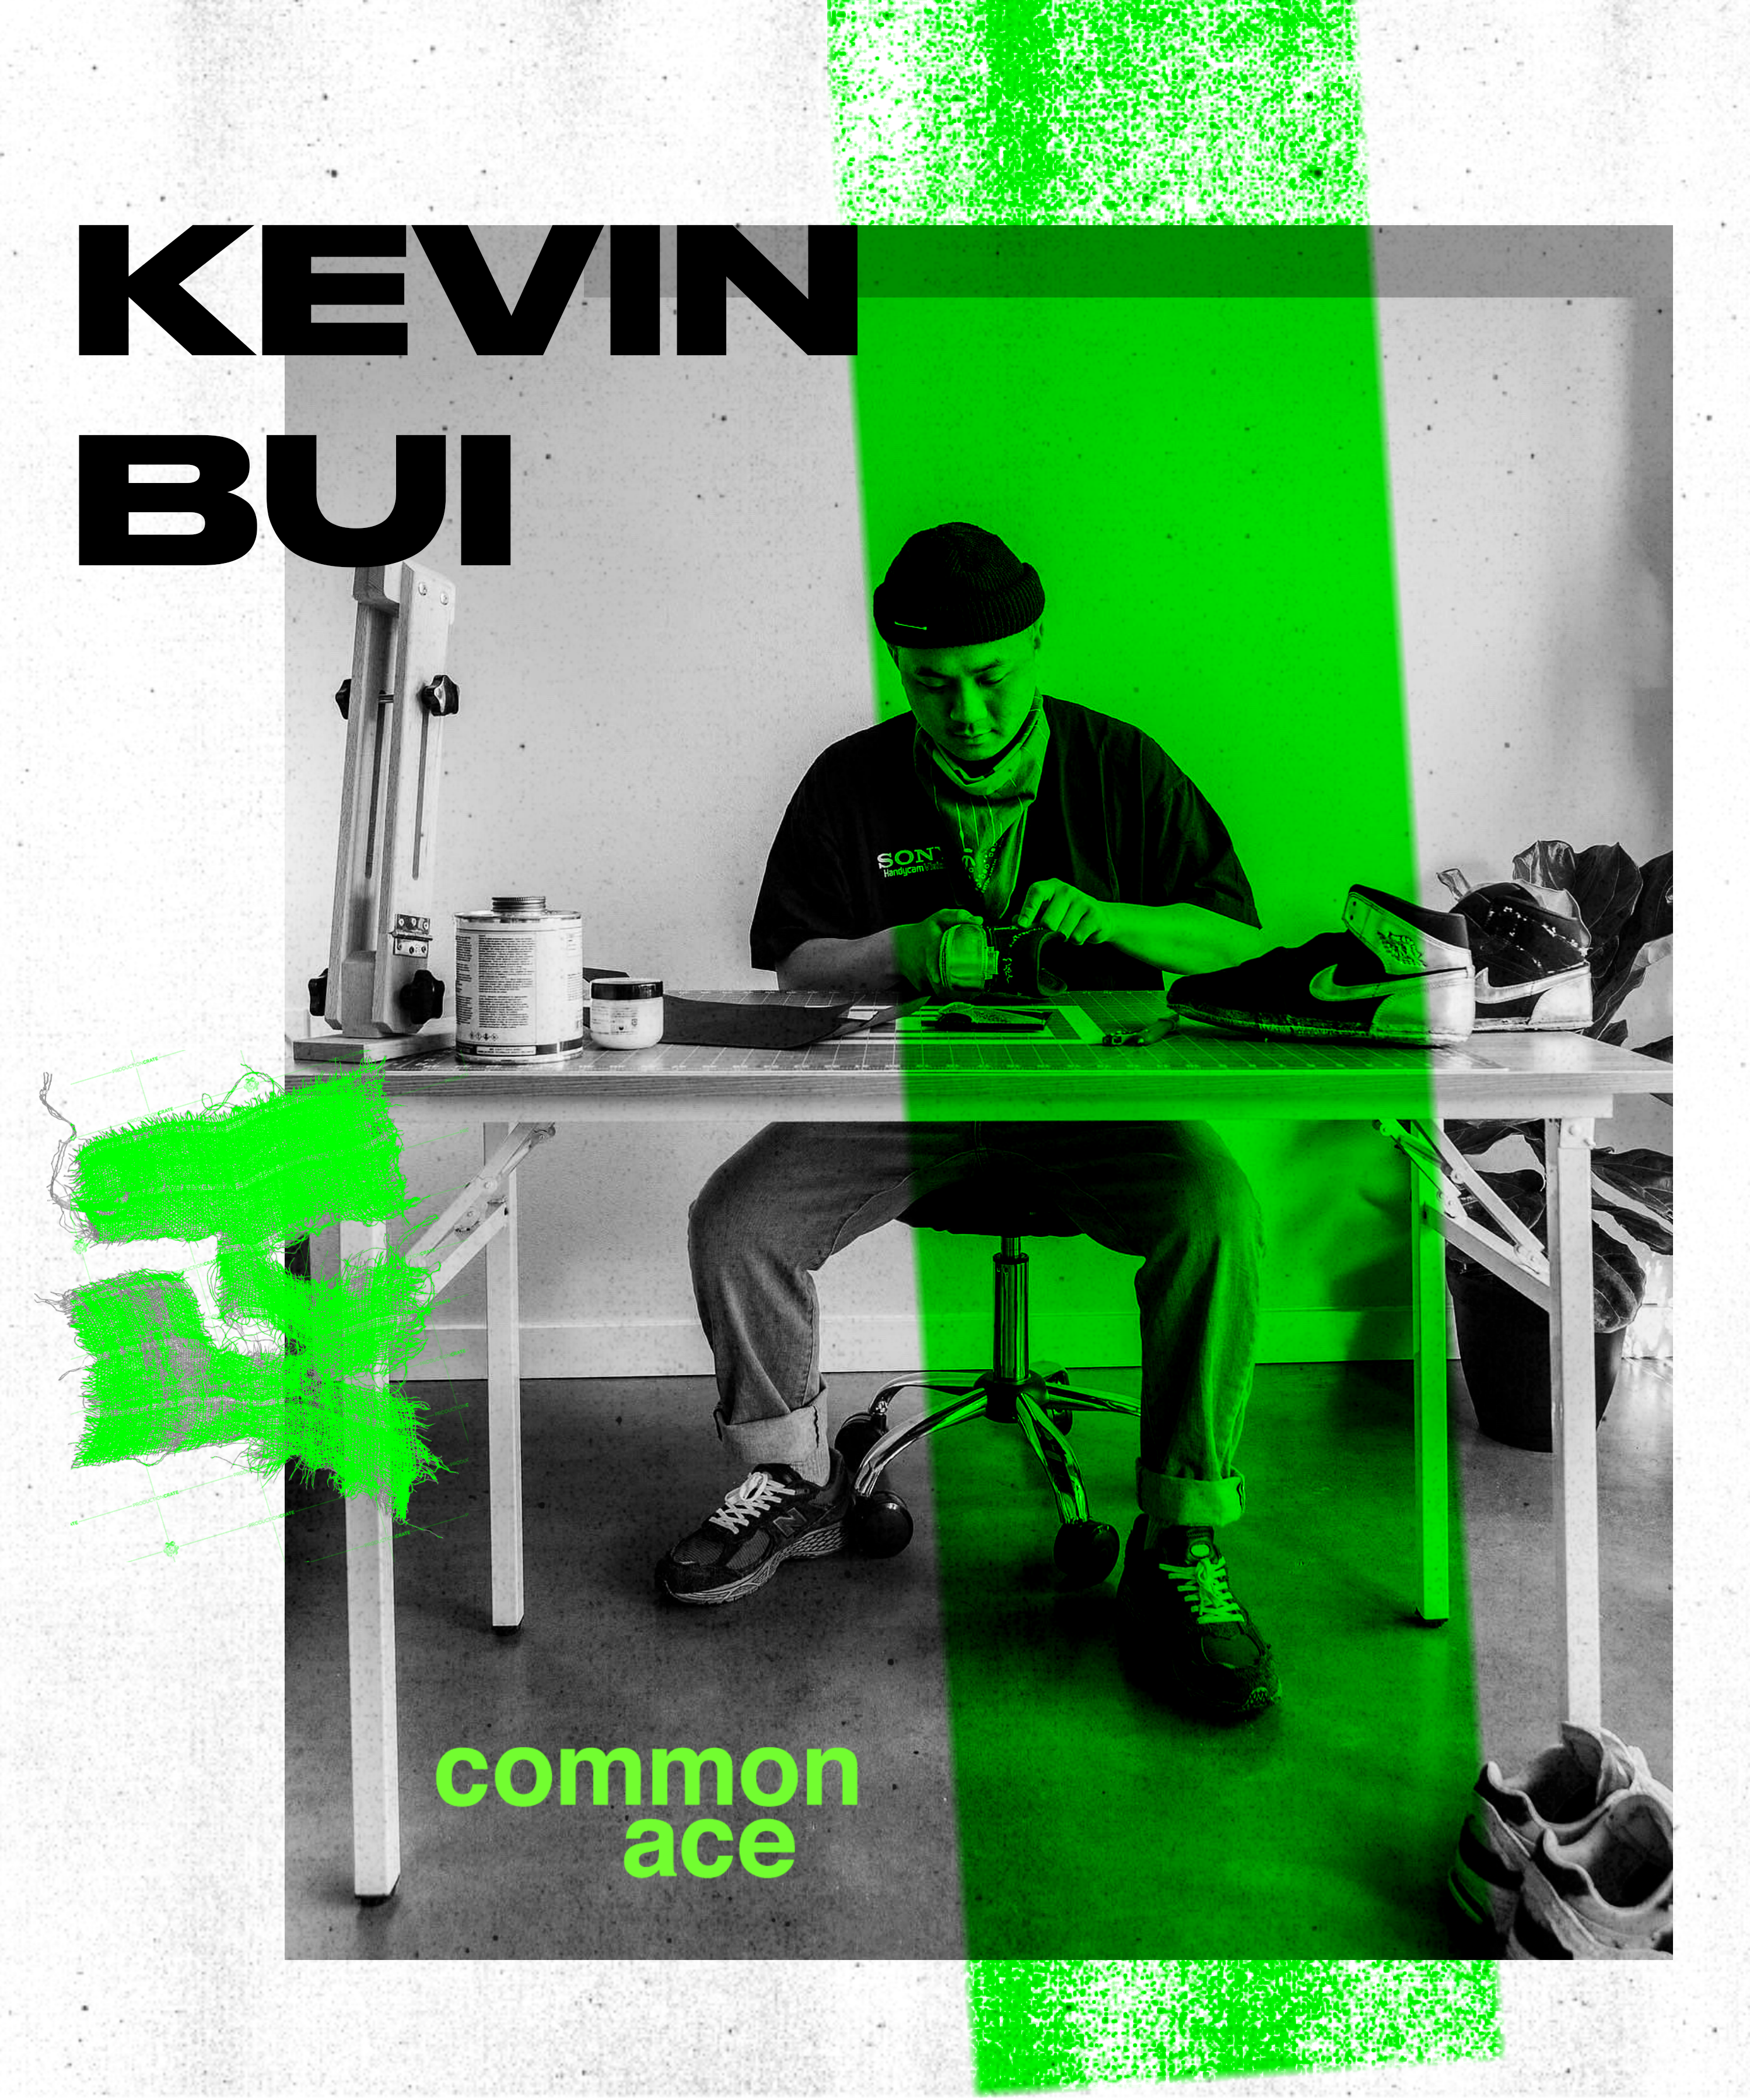 Sustainability + Sneakers: Kevin Bui